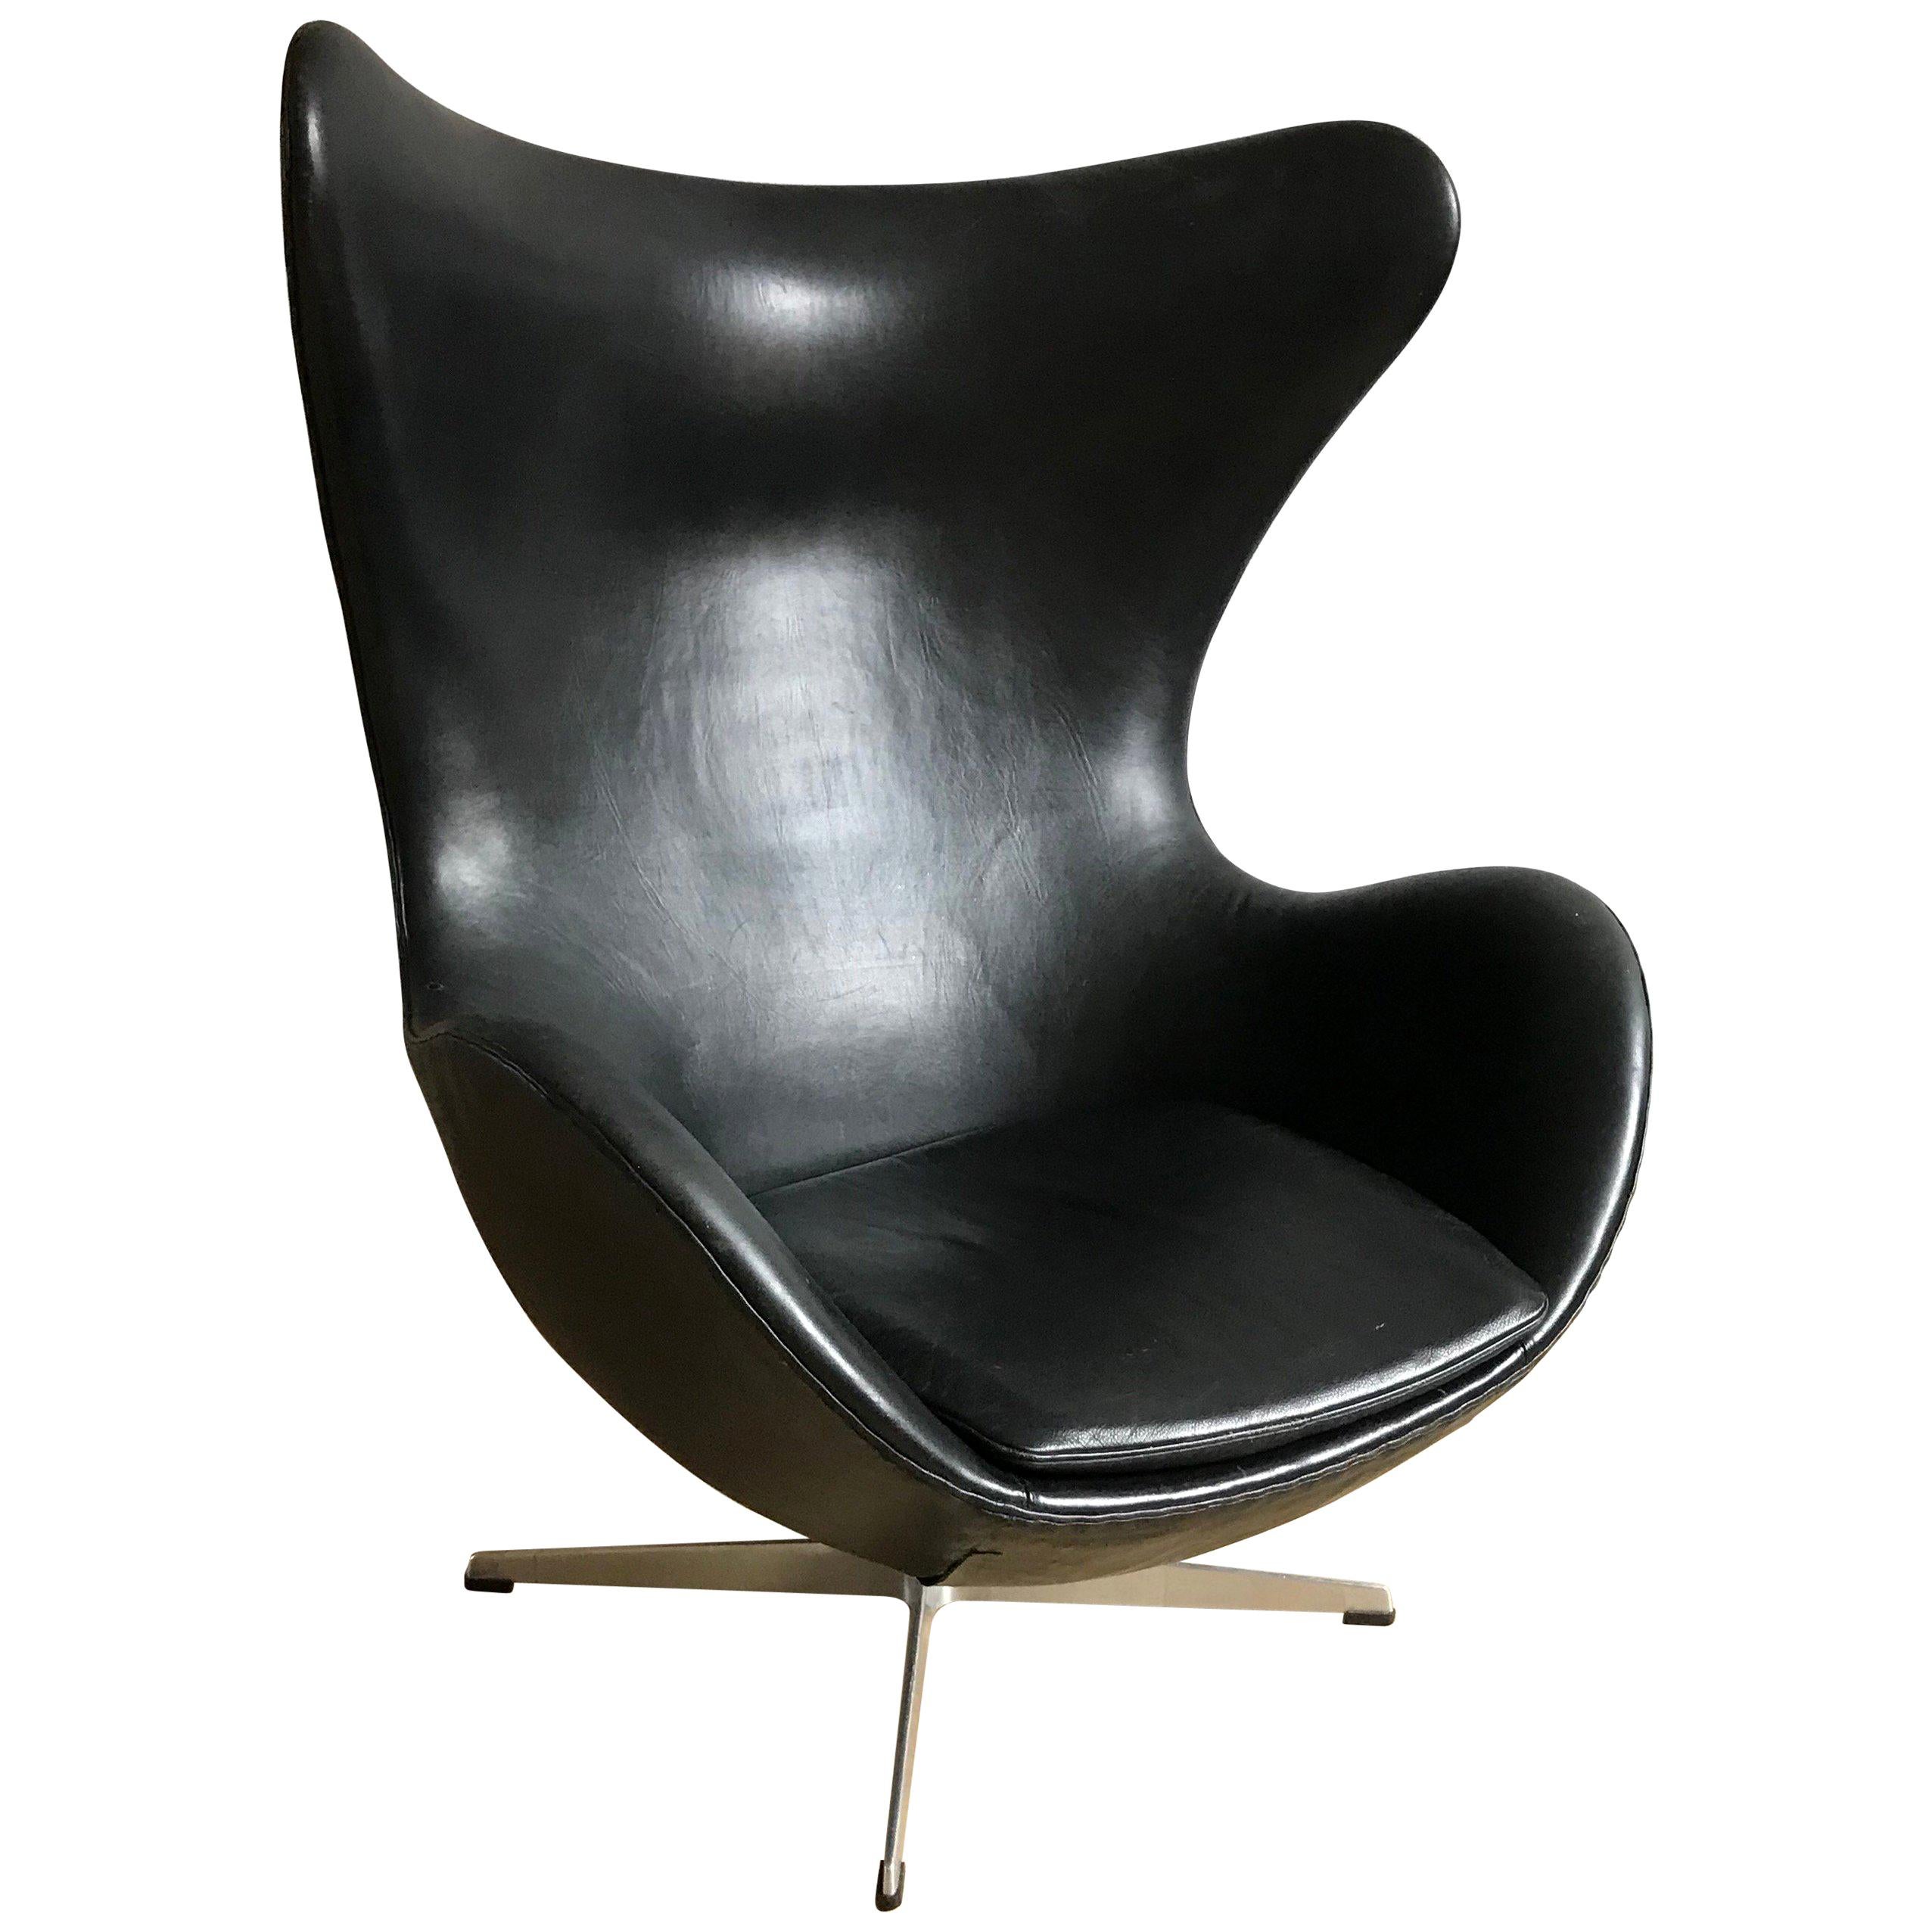 Iconic Vintage Arne Jacobsen 3316 Egg Chair in Black Leather from 1975